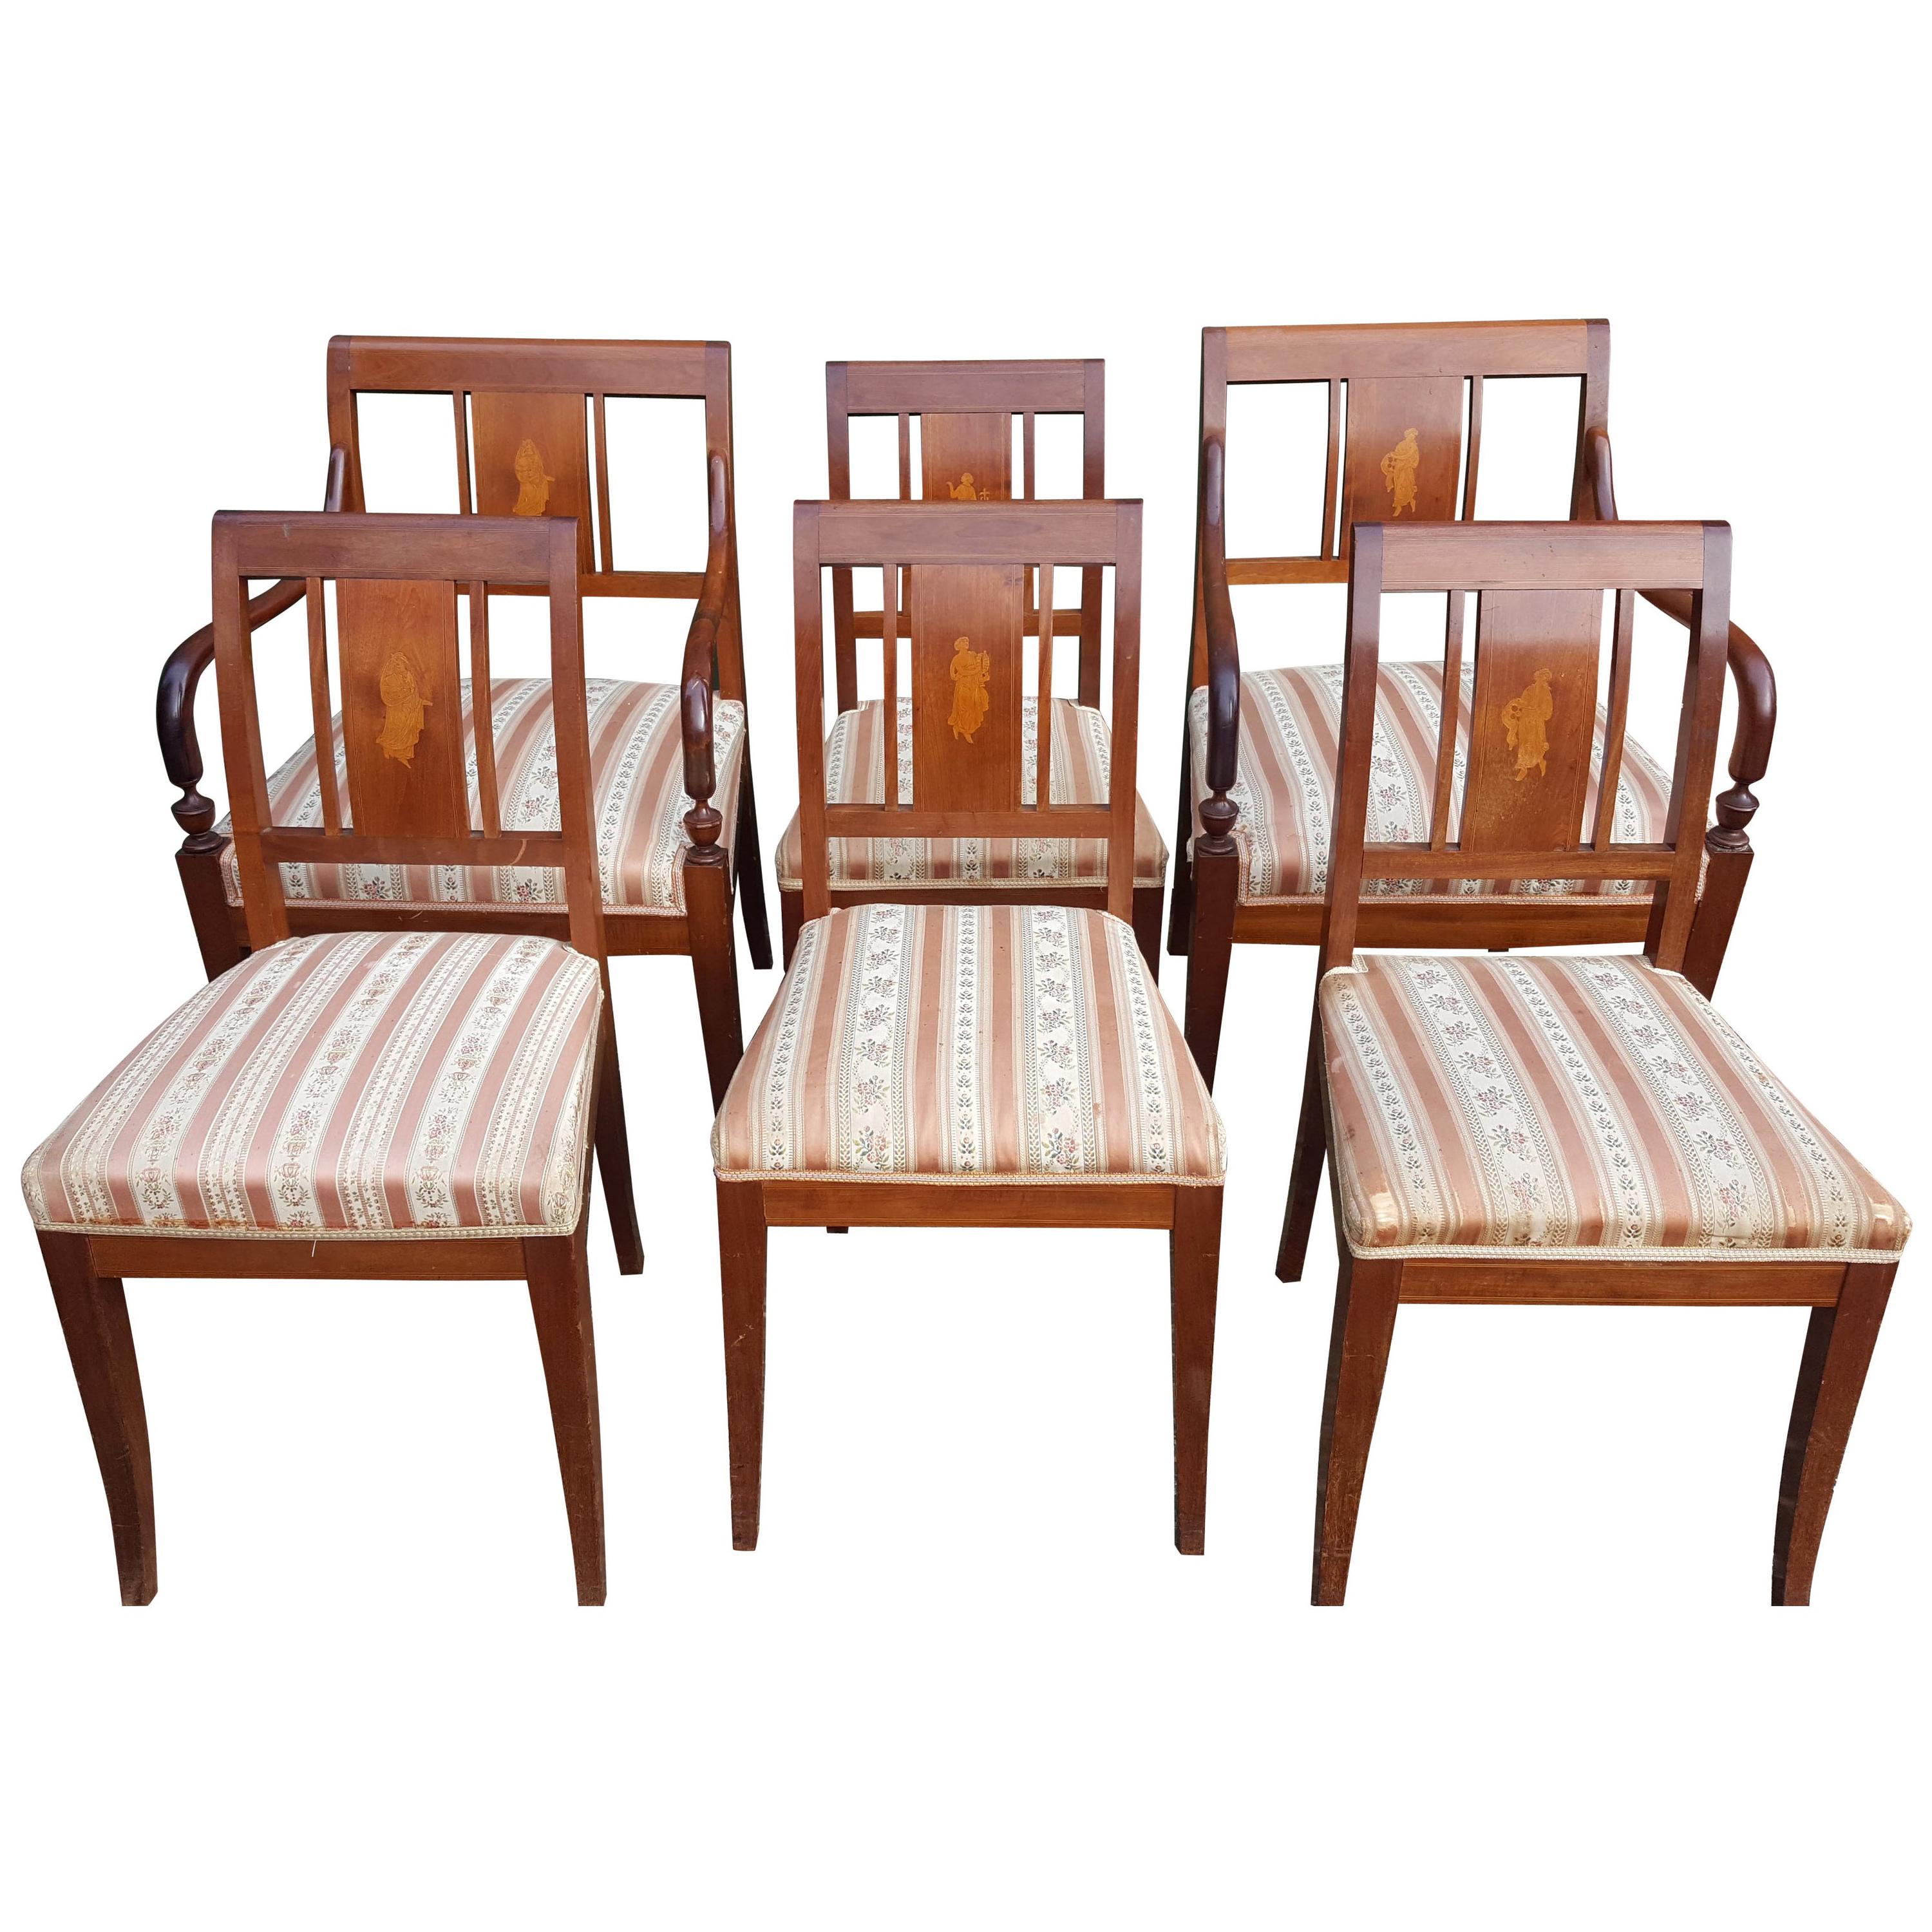 Art Deco Swedish Dining Chairs Set of 6 Marquetry Dark Honey, Early 20th Century